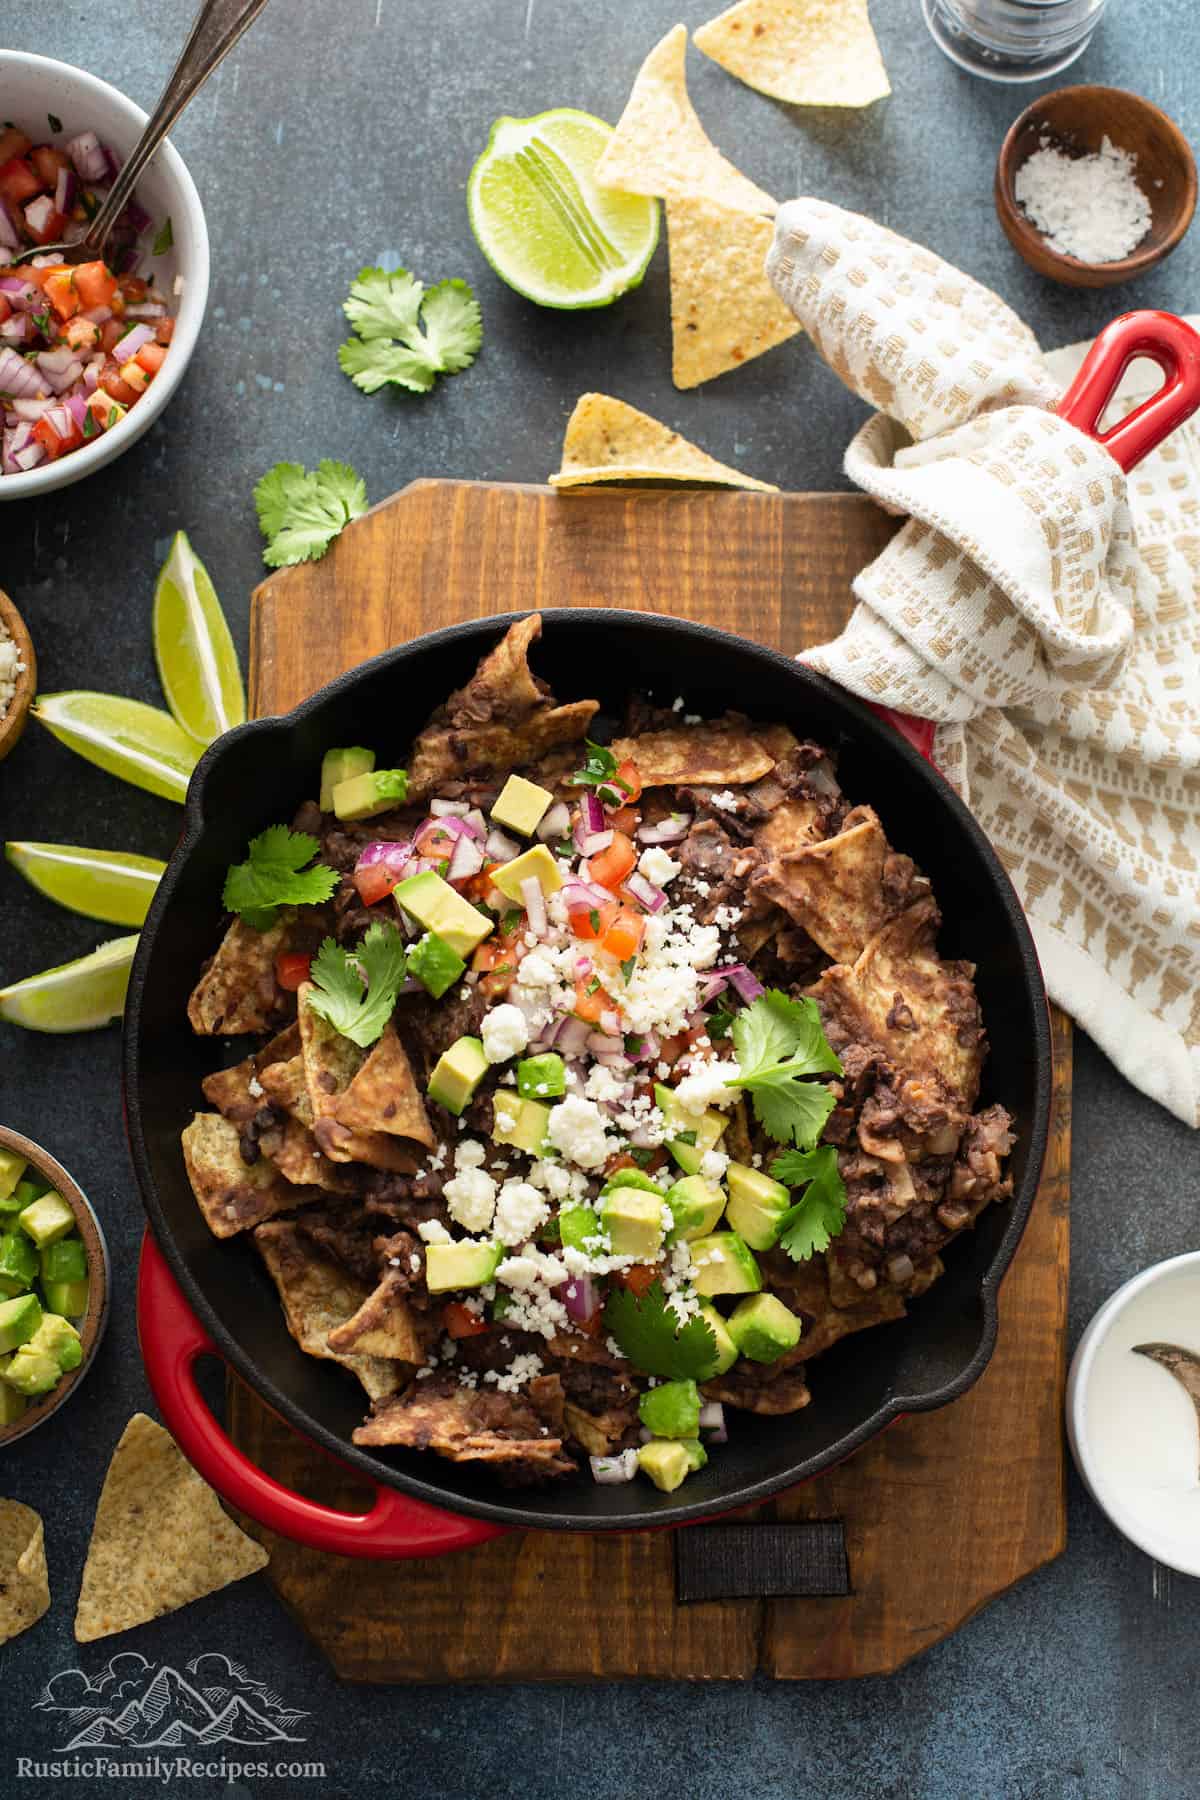 Black bean chilaquiles in a skillet topped with avocado, sour cream and salsa.